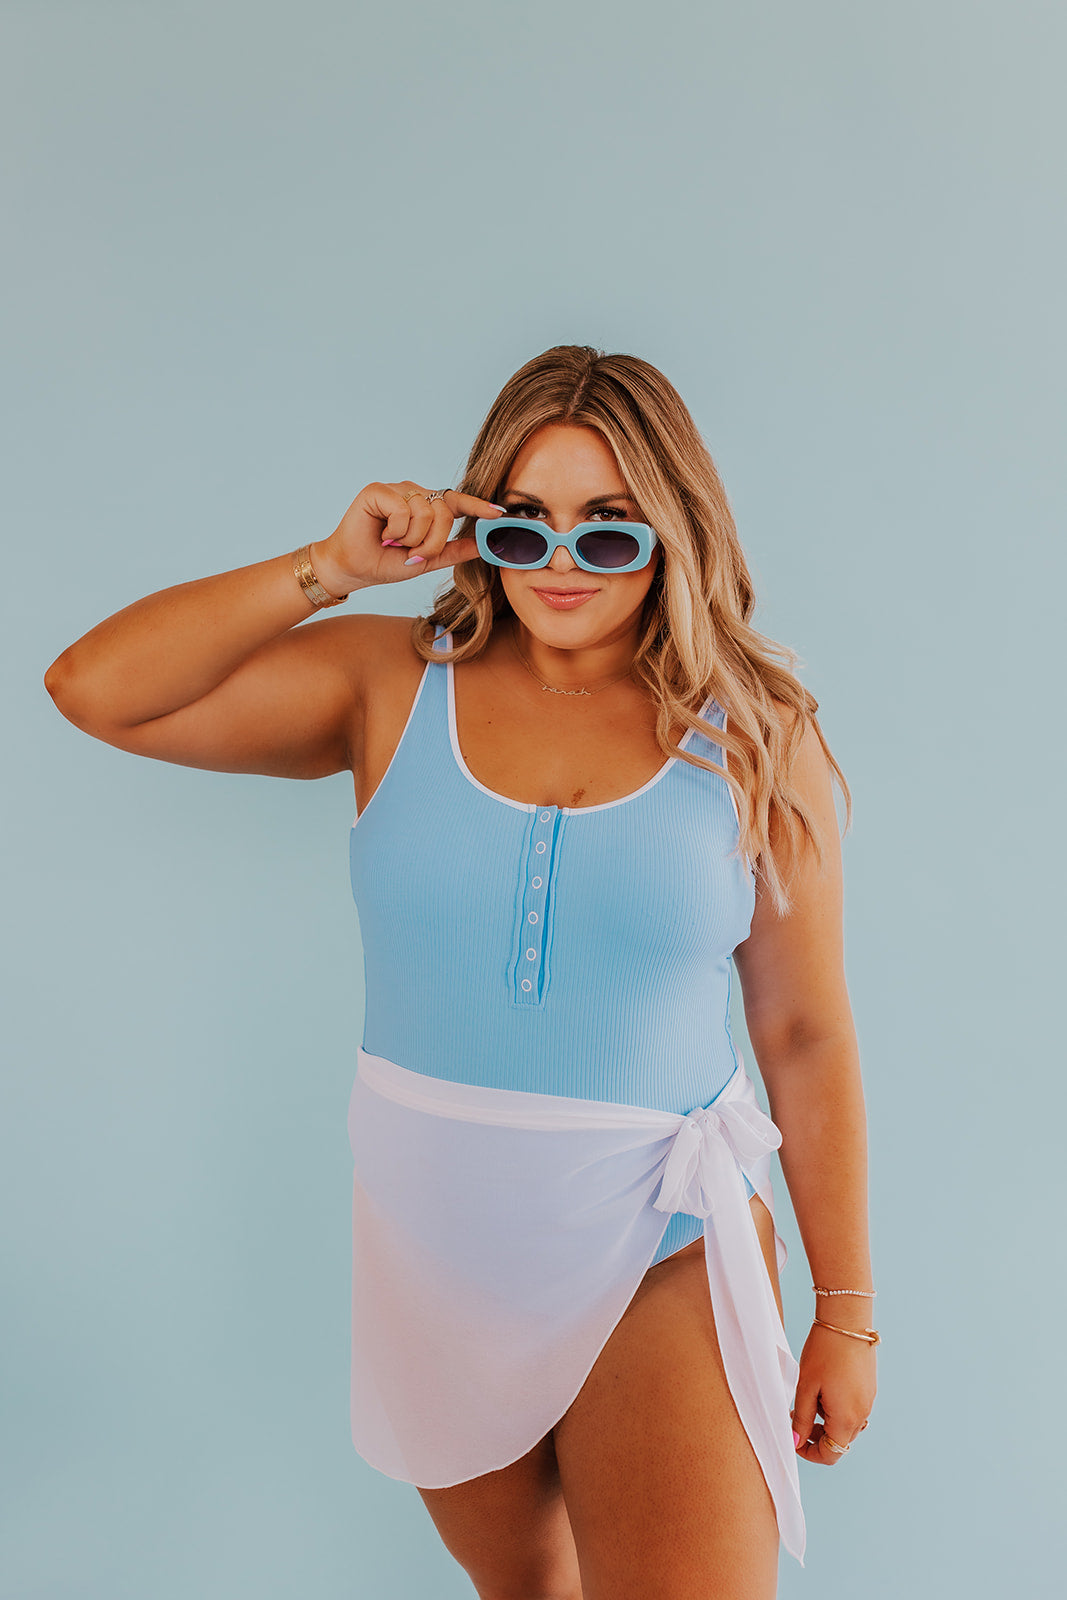 BUTTON FRONT ONE PIECE IN RIBBED COTTON CANDY BLUE BY SARAH TRIPP X PINK DESERT